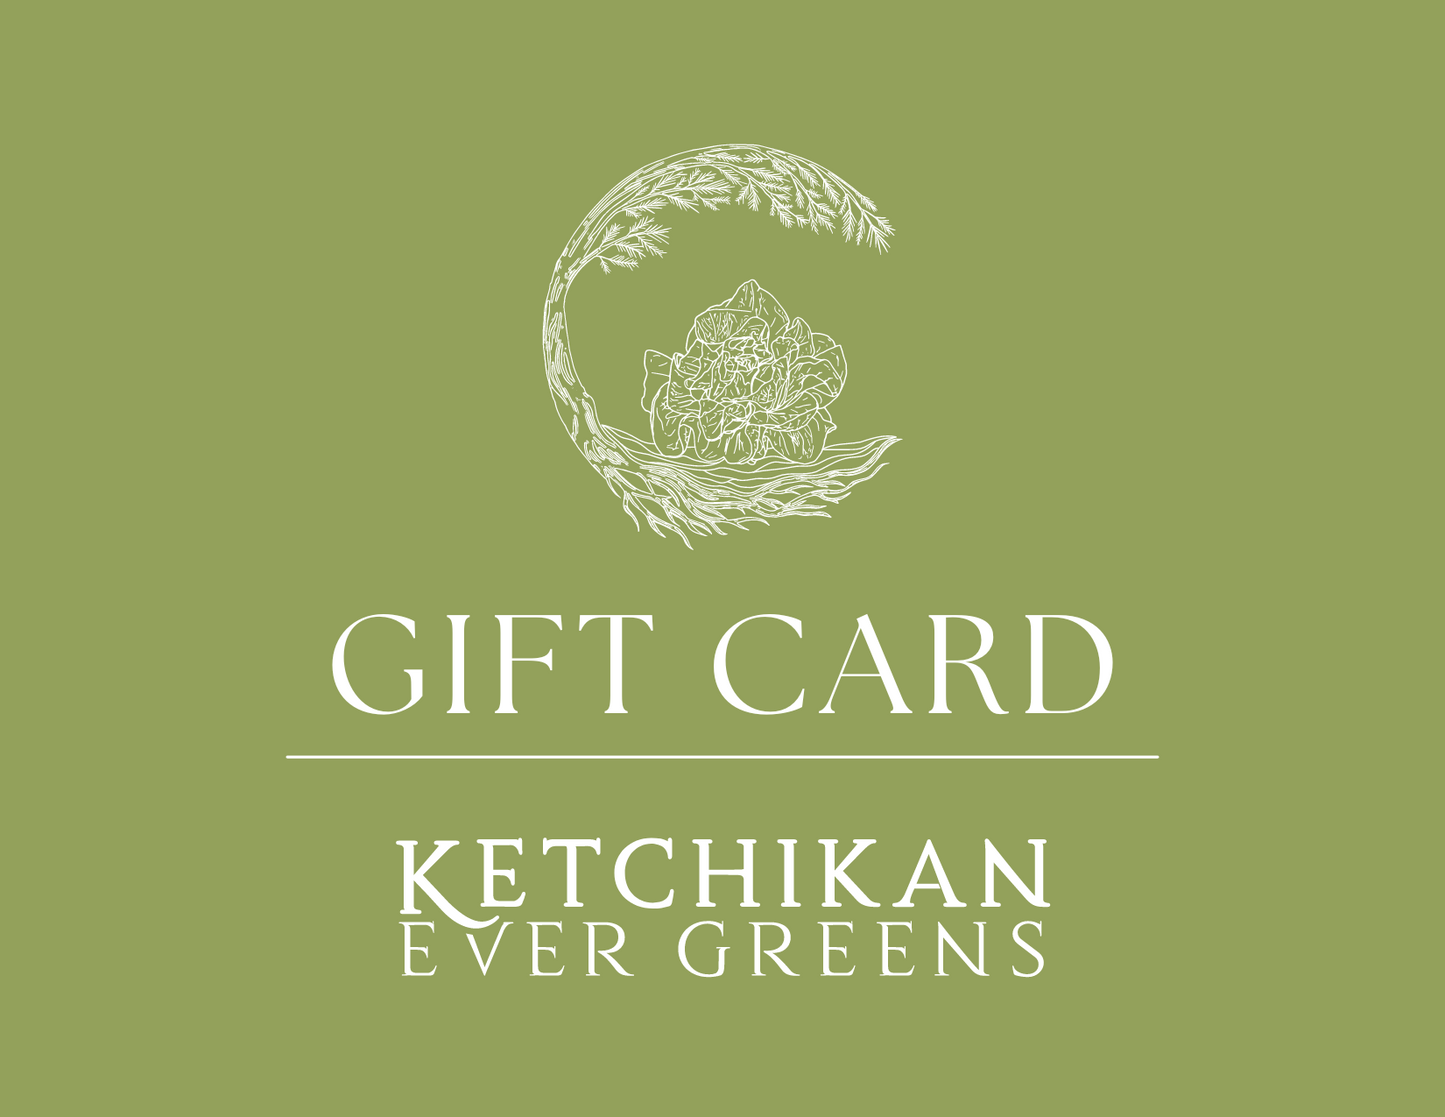 Ever Greens Gift Card